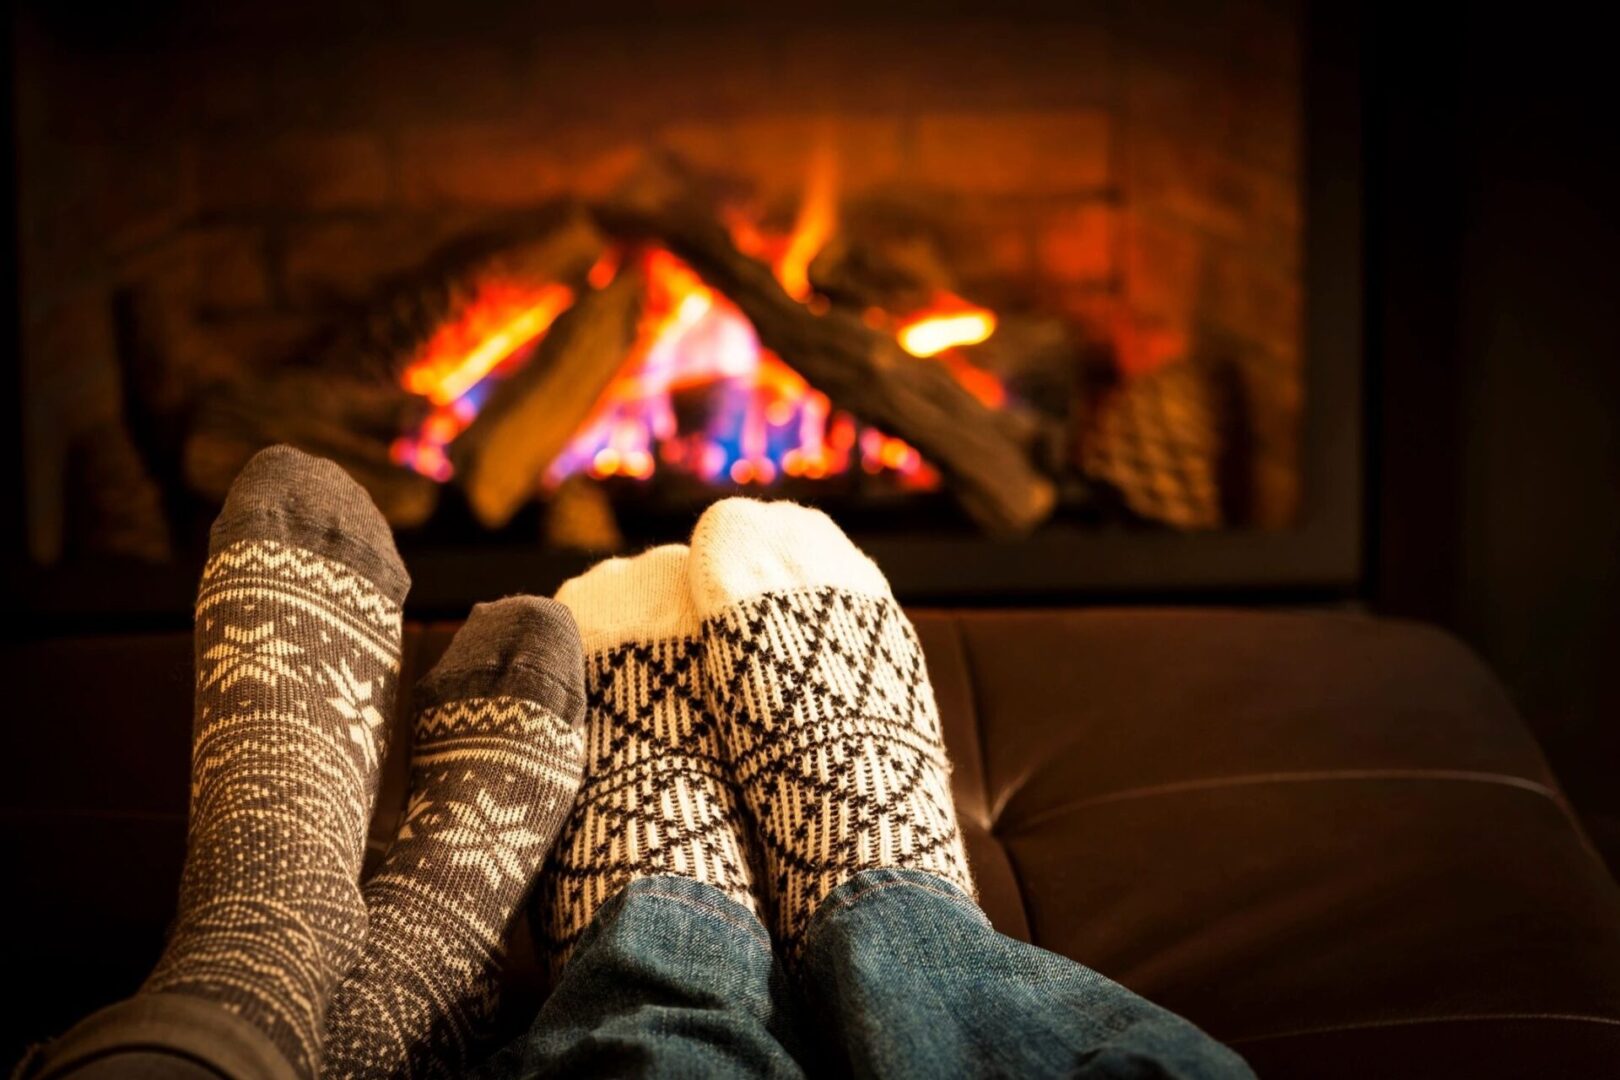 People wearing socks while sitting in front of a fireplace